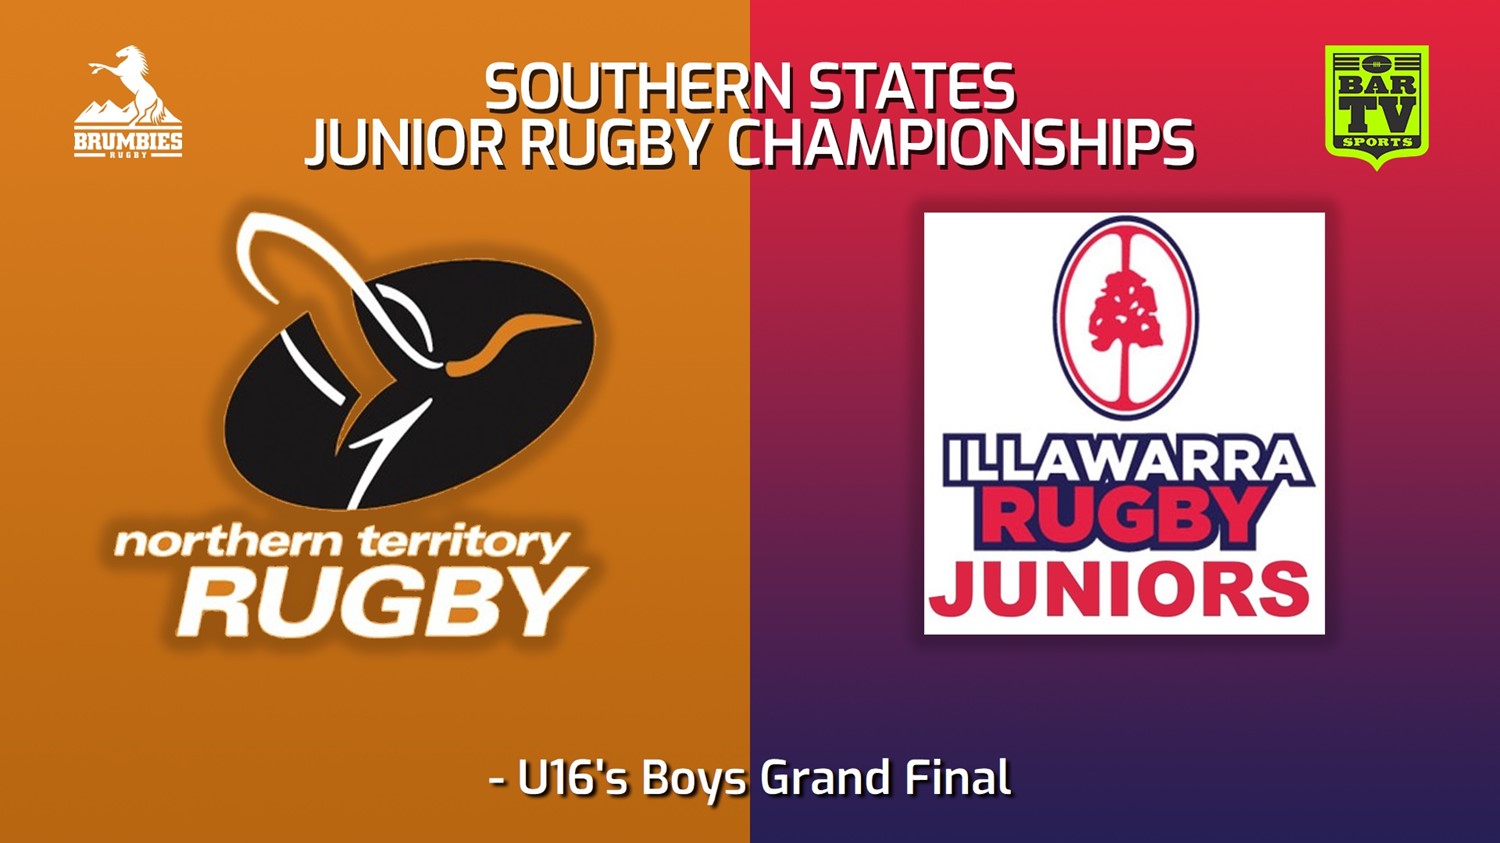 220715-2022 Southern States Junior Rugby Championships U16's Boys Grand Final - Northern Territory Rugby v Illawarra Rugby Slate Image